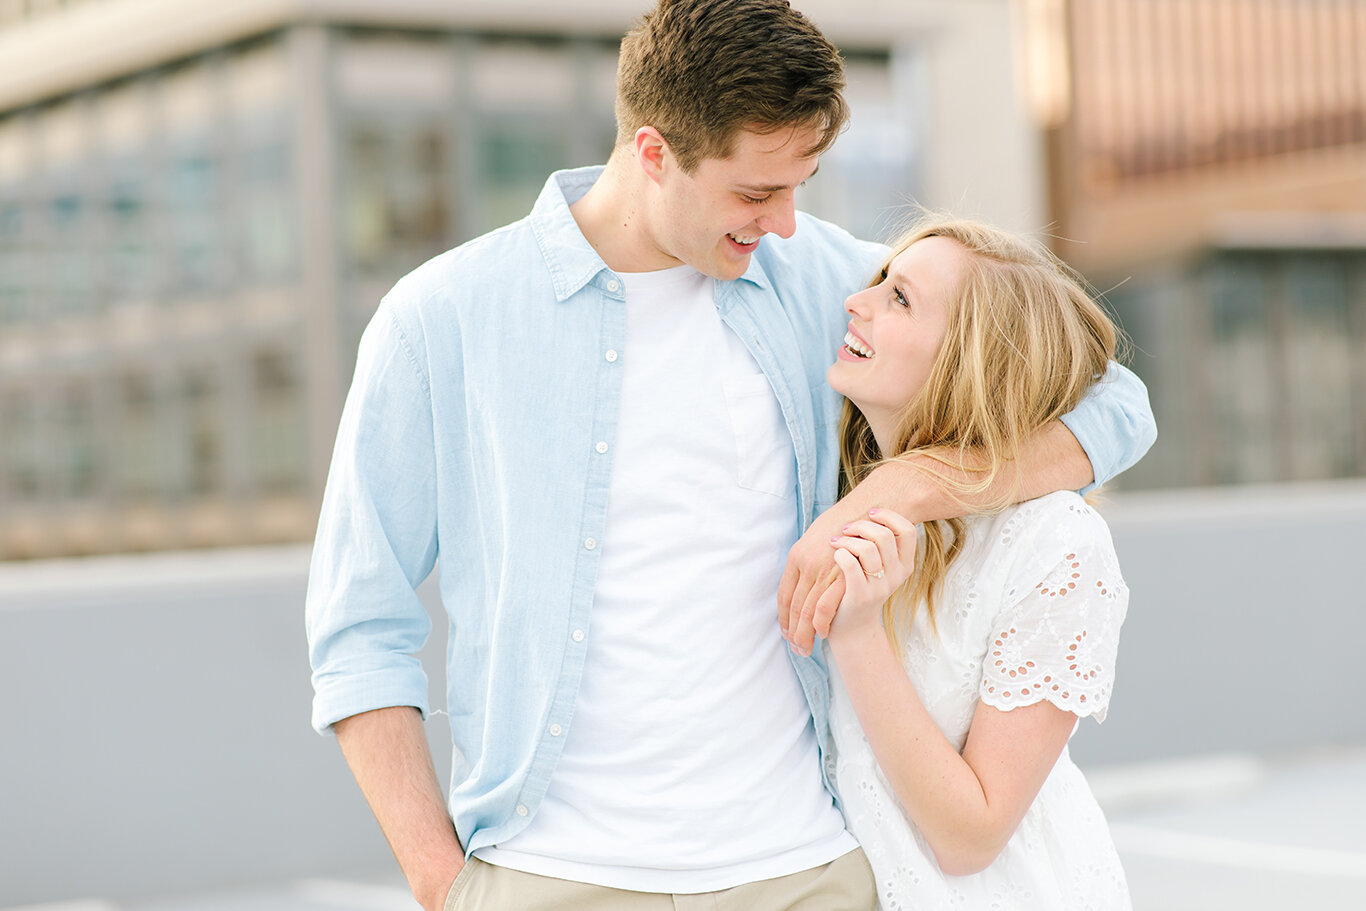  arm around fiance engagement photo session downtown photo session cityscape city creek mall harmon’s building rooftop photo session salt lake city utah professional utah valley engagement photographer #downtownsaltlakecity #engagements #utah #saltla